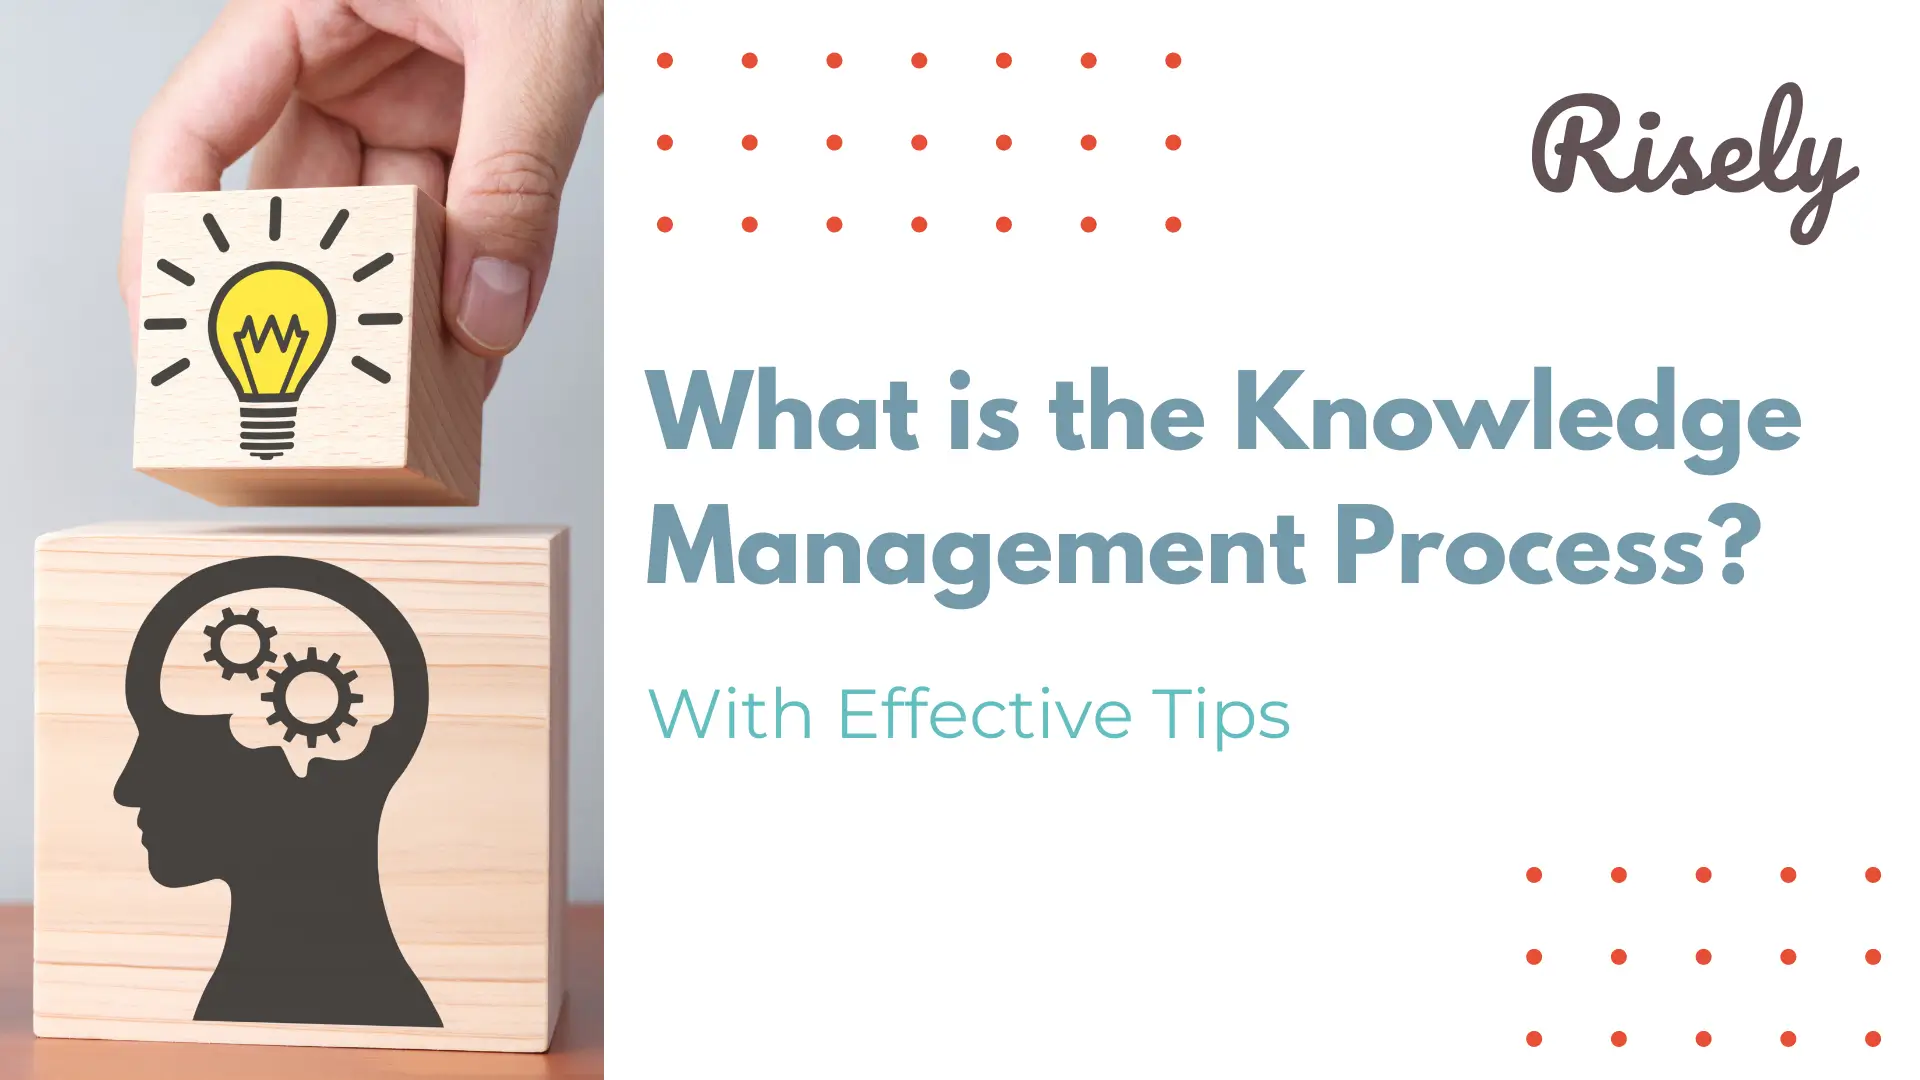 What is the Knowledge Management Process? With Effective Tips